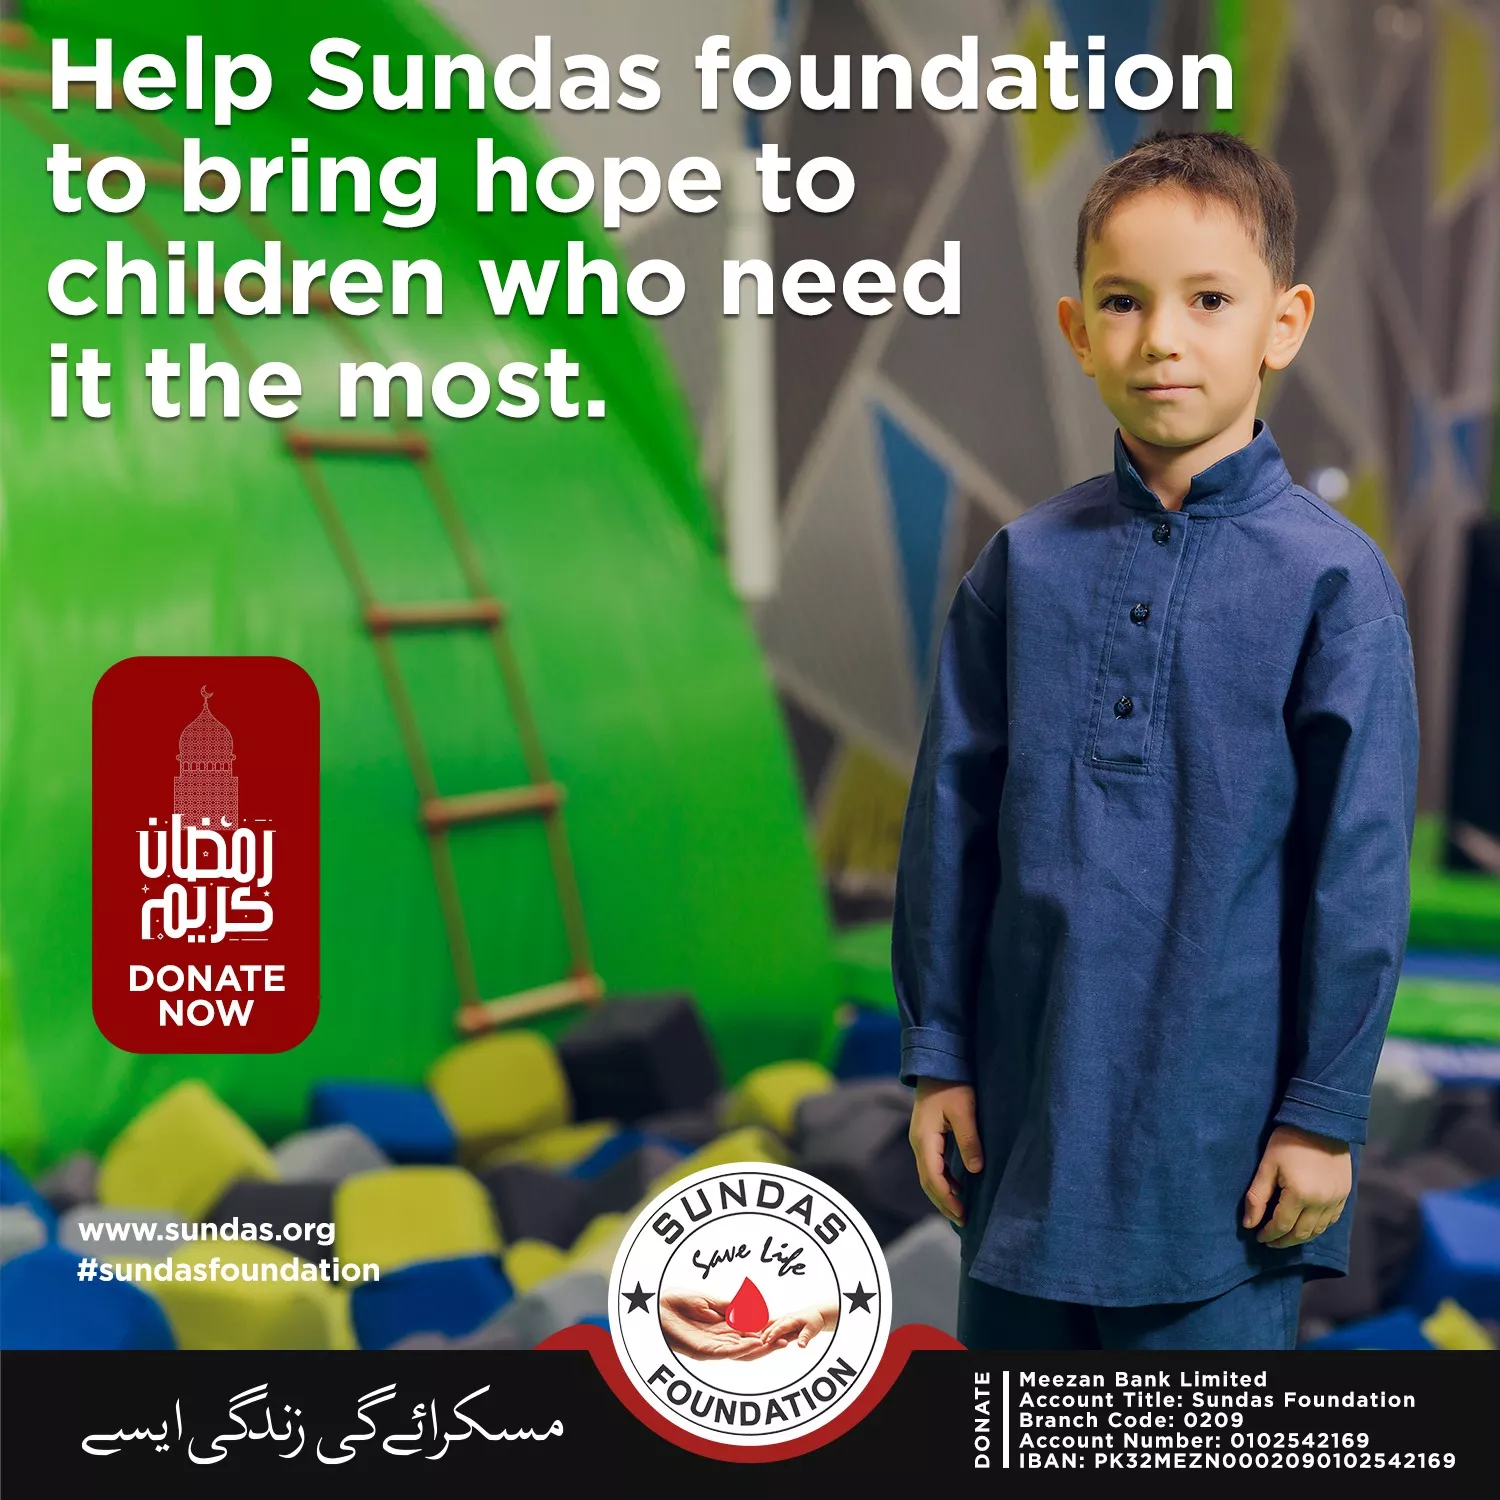 SUNDAS FOUNDATION - PLAY YOUR PART IN SAVING LIVES